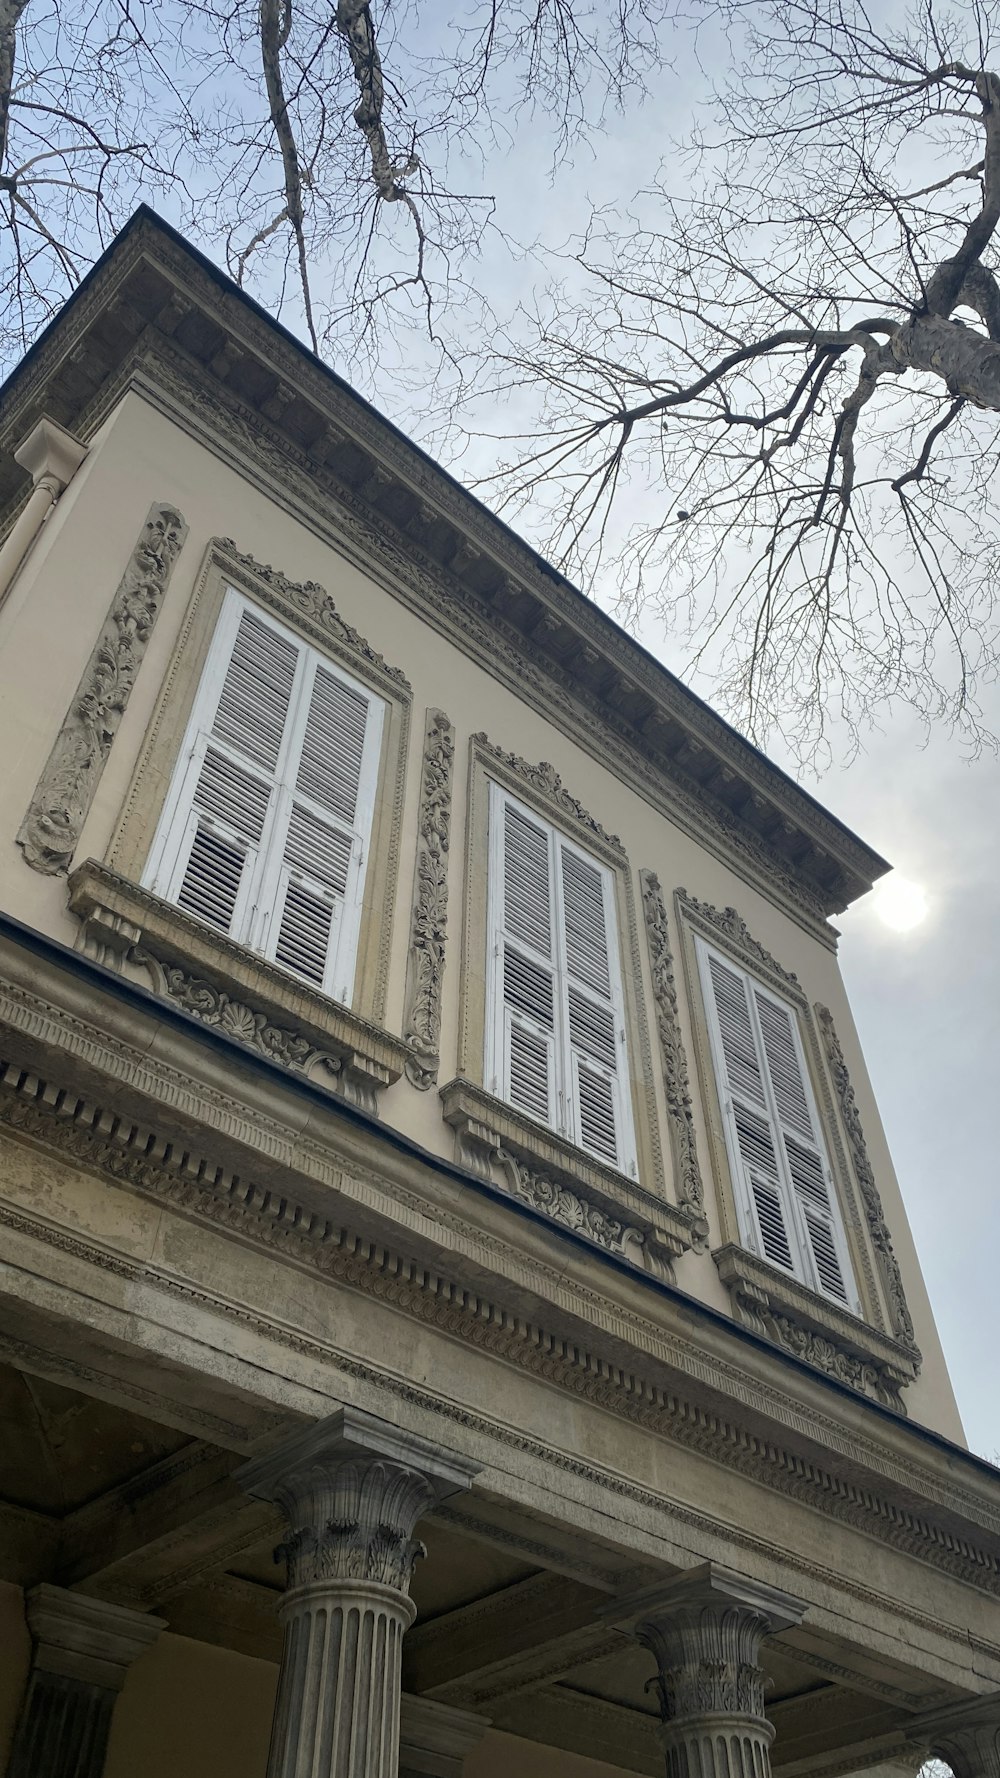 an old building with columns and windows